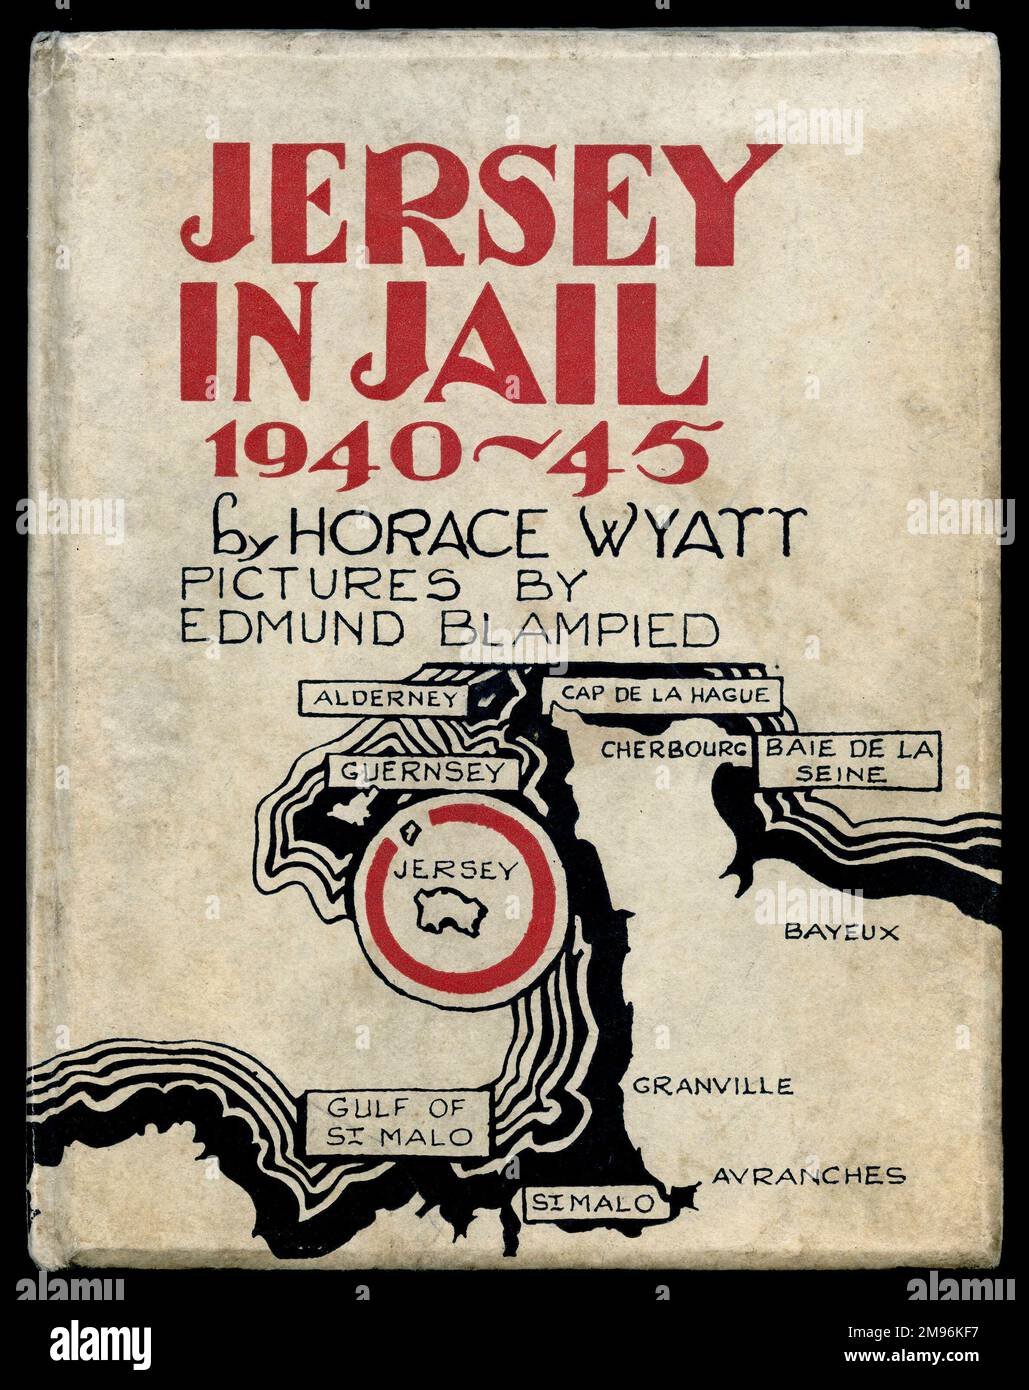 Cover design, Jersey in Jail 1940-45, by Horace Wyatt, with illustrations by Edmund Blampied. Stock Photo